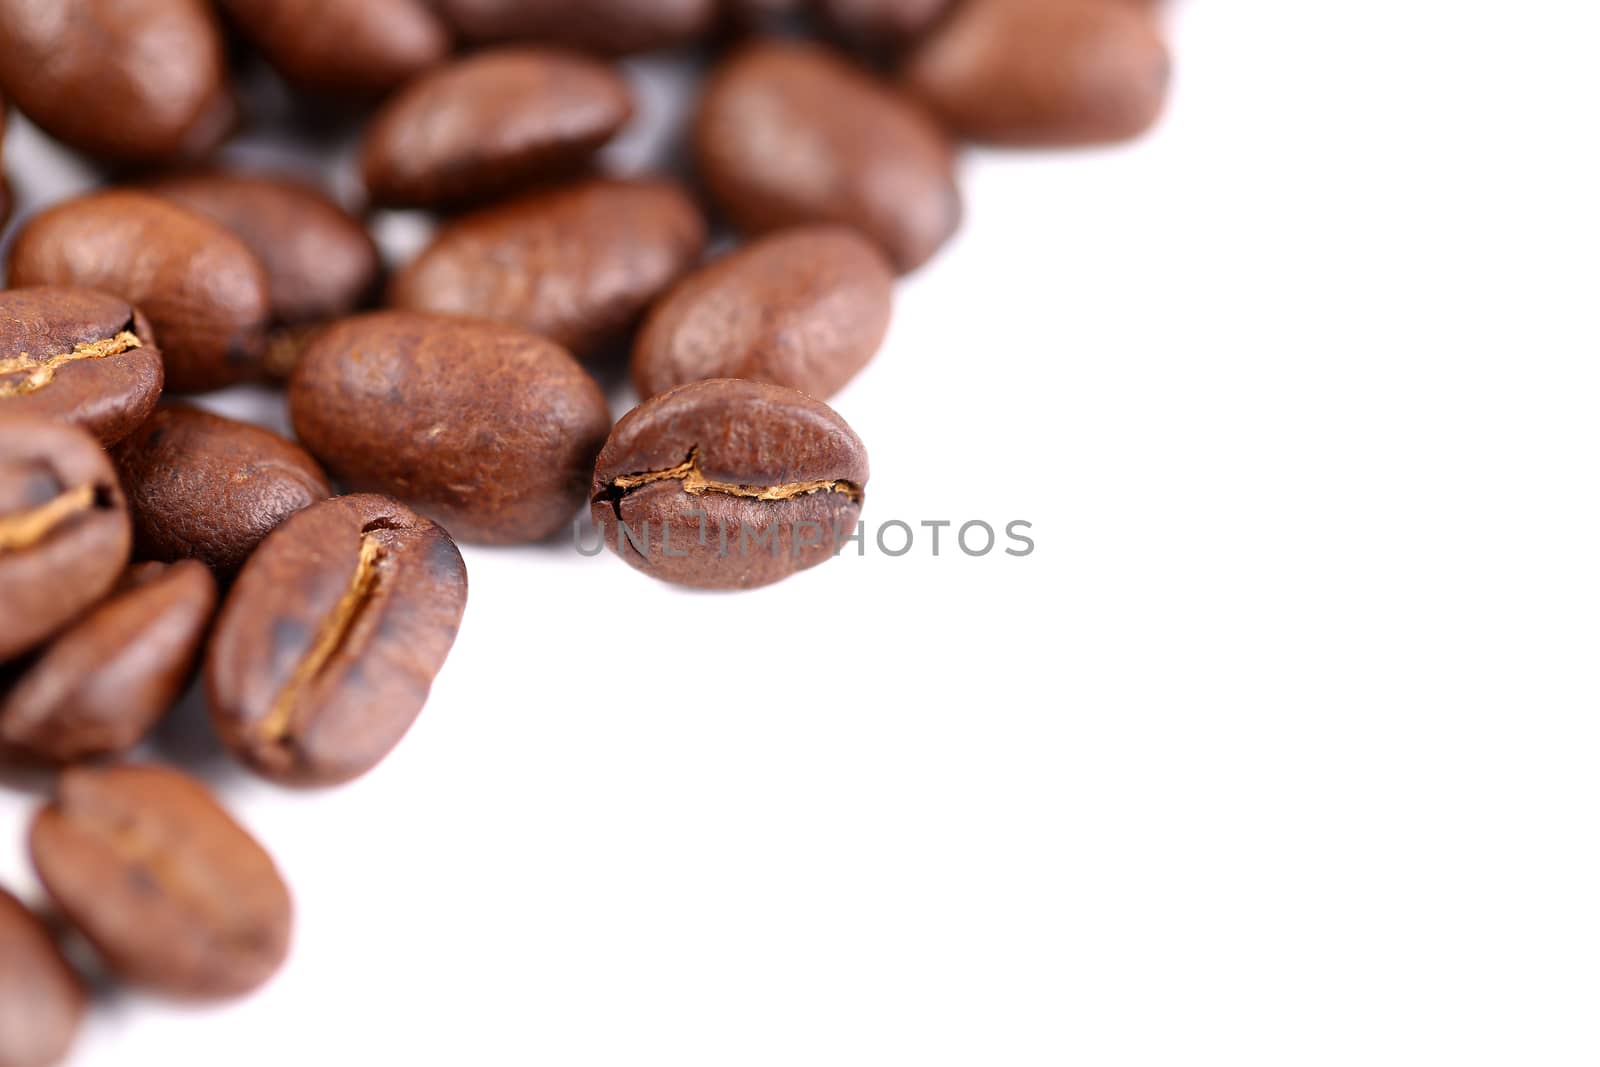 roasted coffee beans are located left on the white background